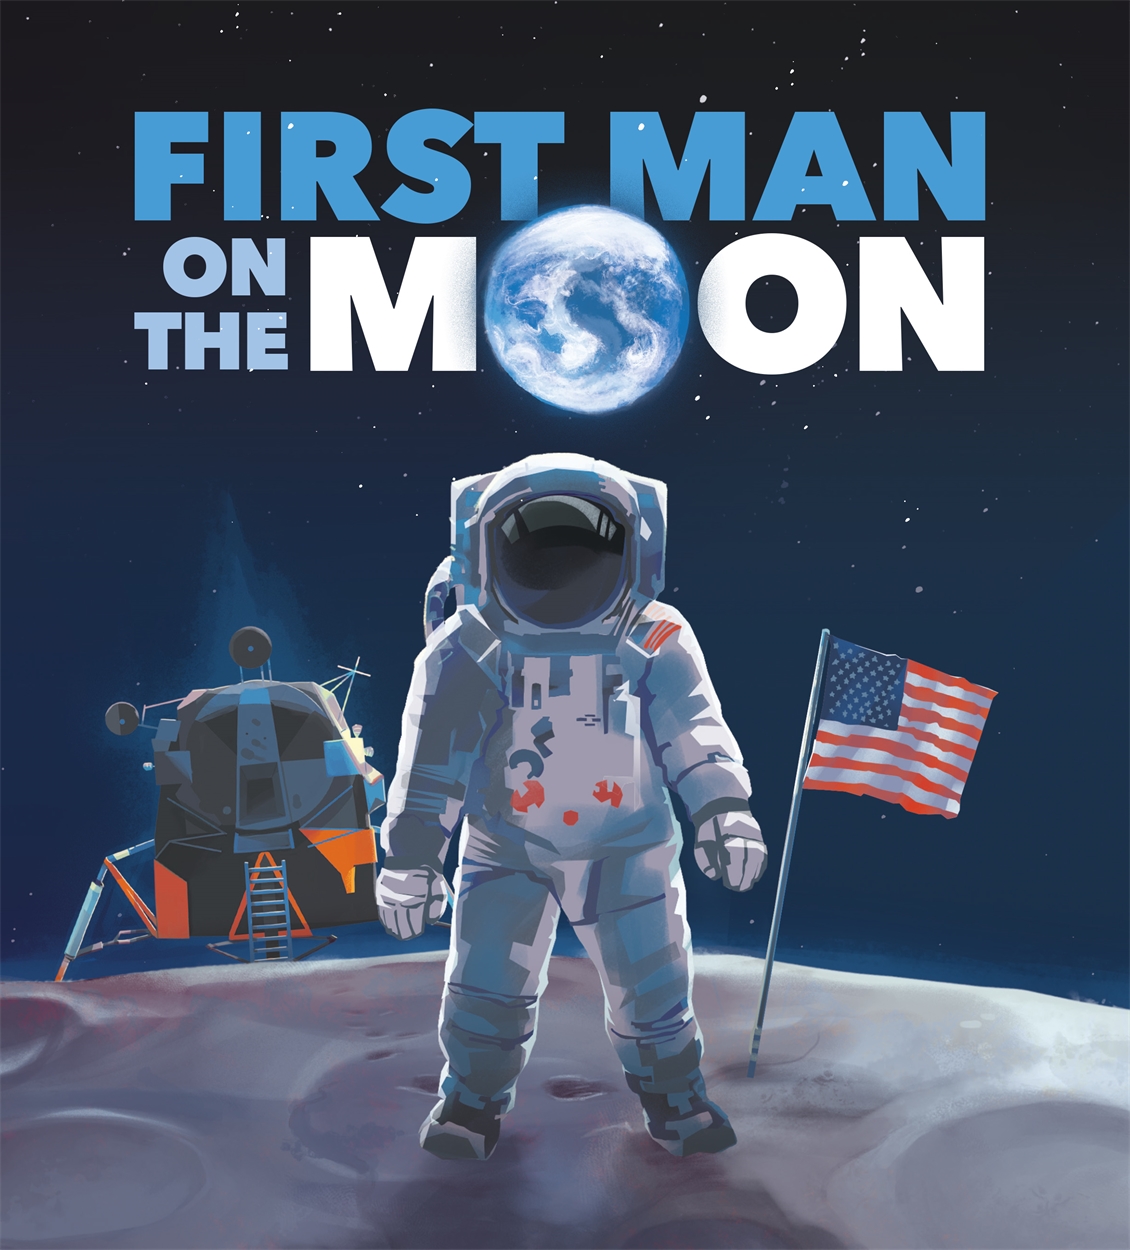 who was really the first man on the moon